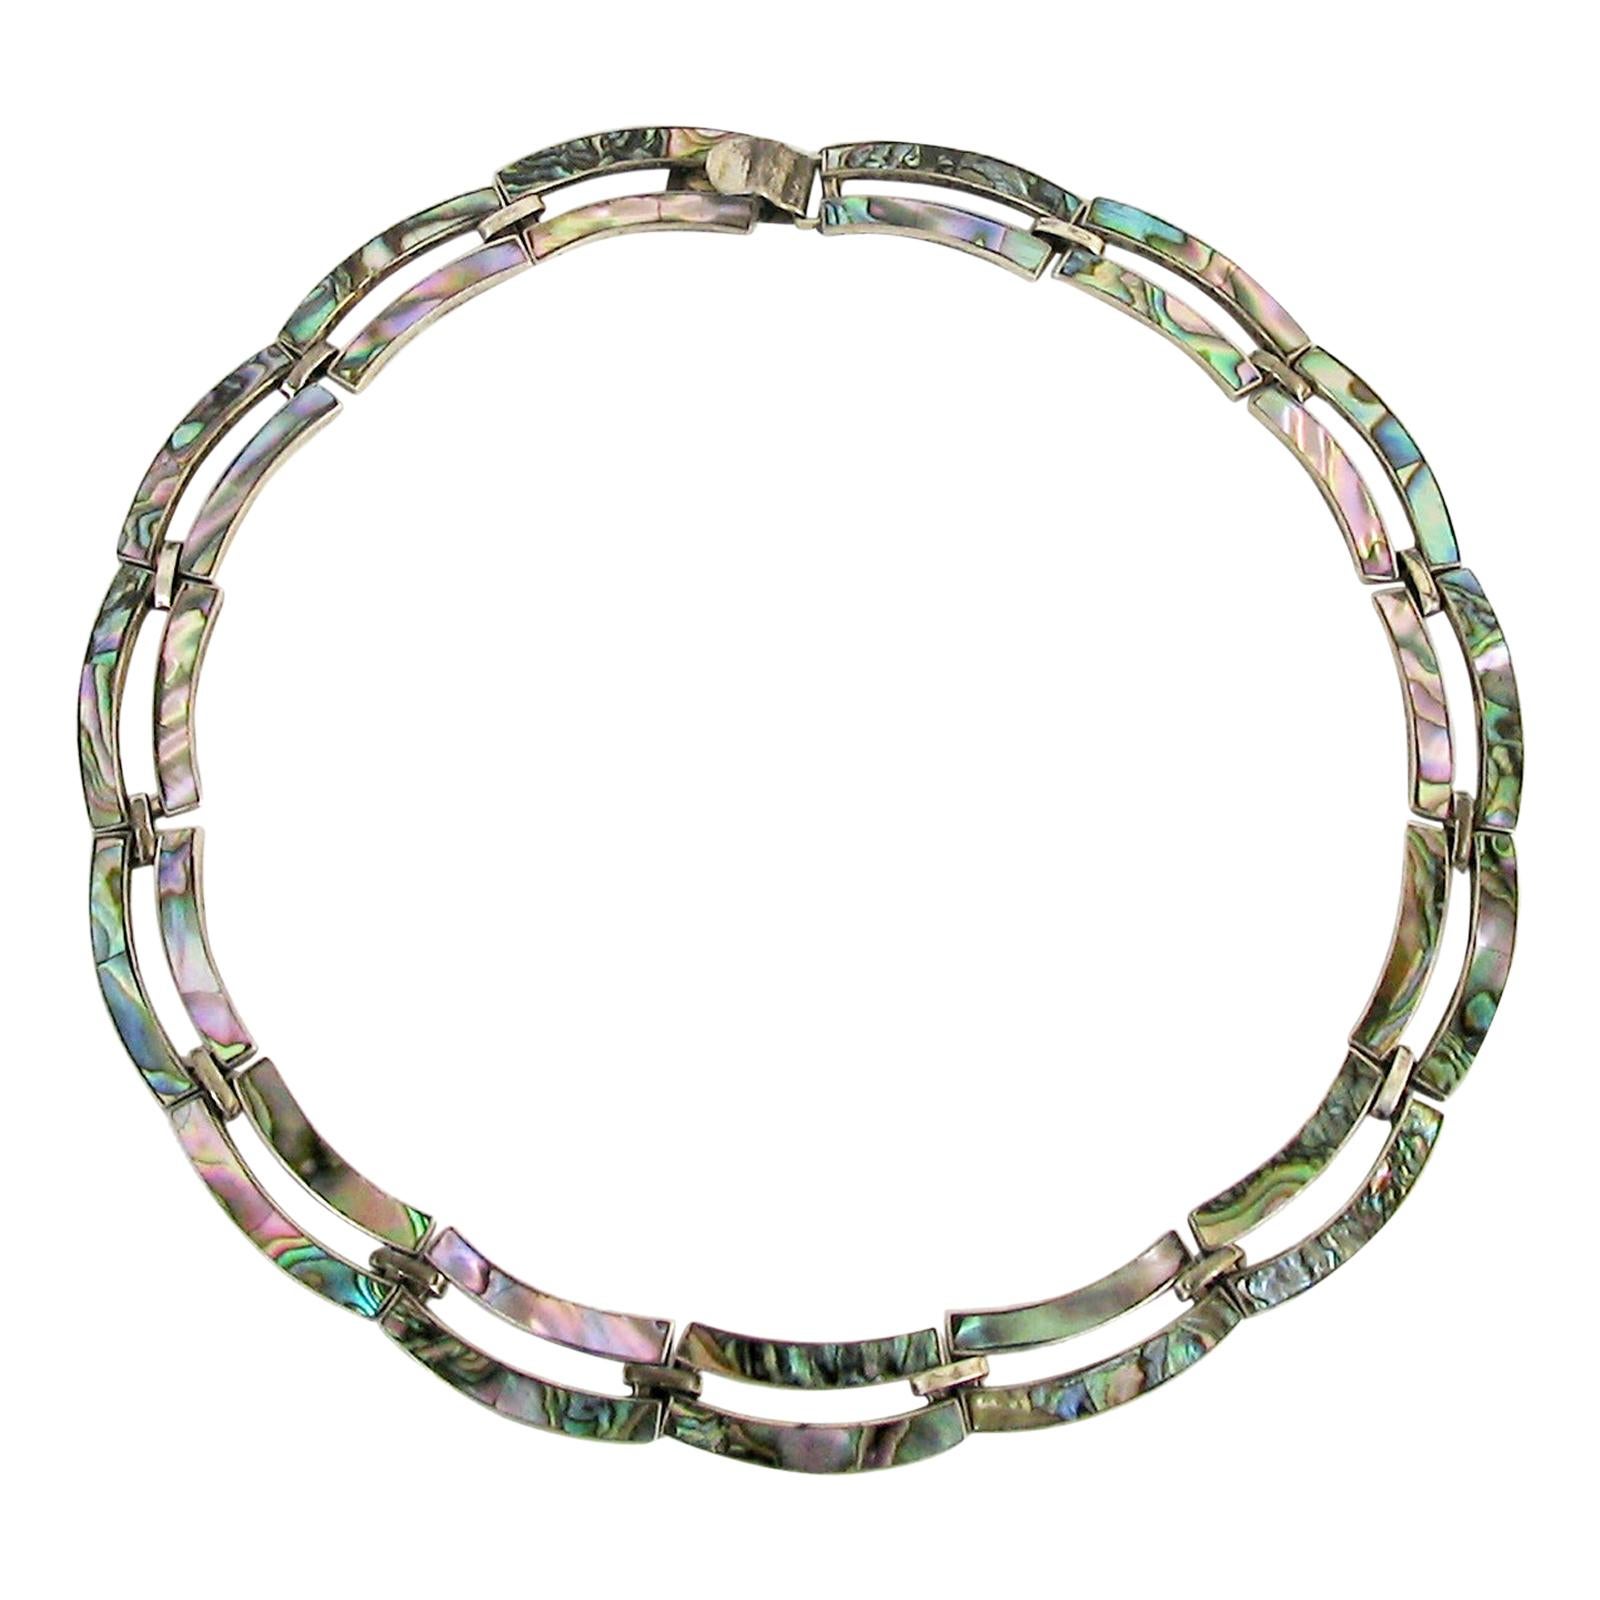 Art Deco Silver Necklace with Mother of Pearl Inlay by Taxco Mexico